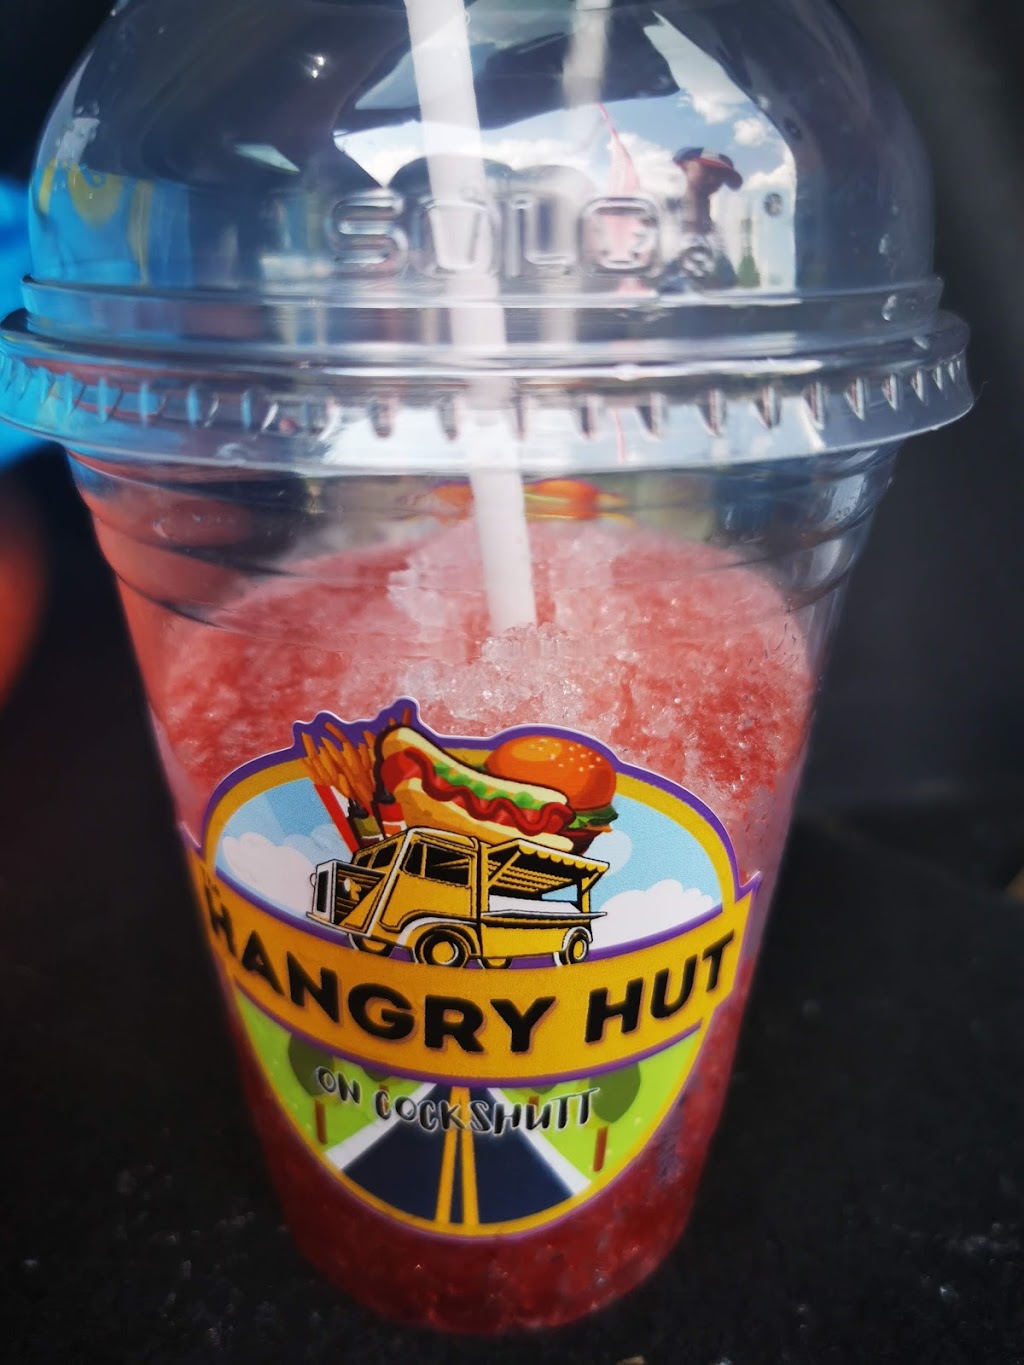 The Hangry Hut | 490 Empire Rd, Sherkston, ON L0S 1R0, Canada | Phone: (226) 934-4829